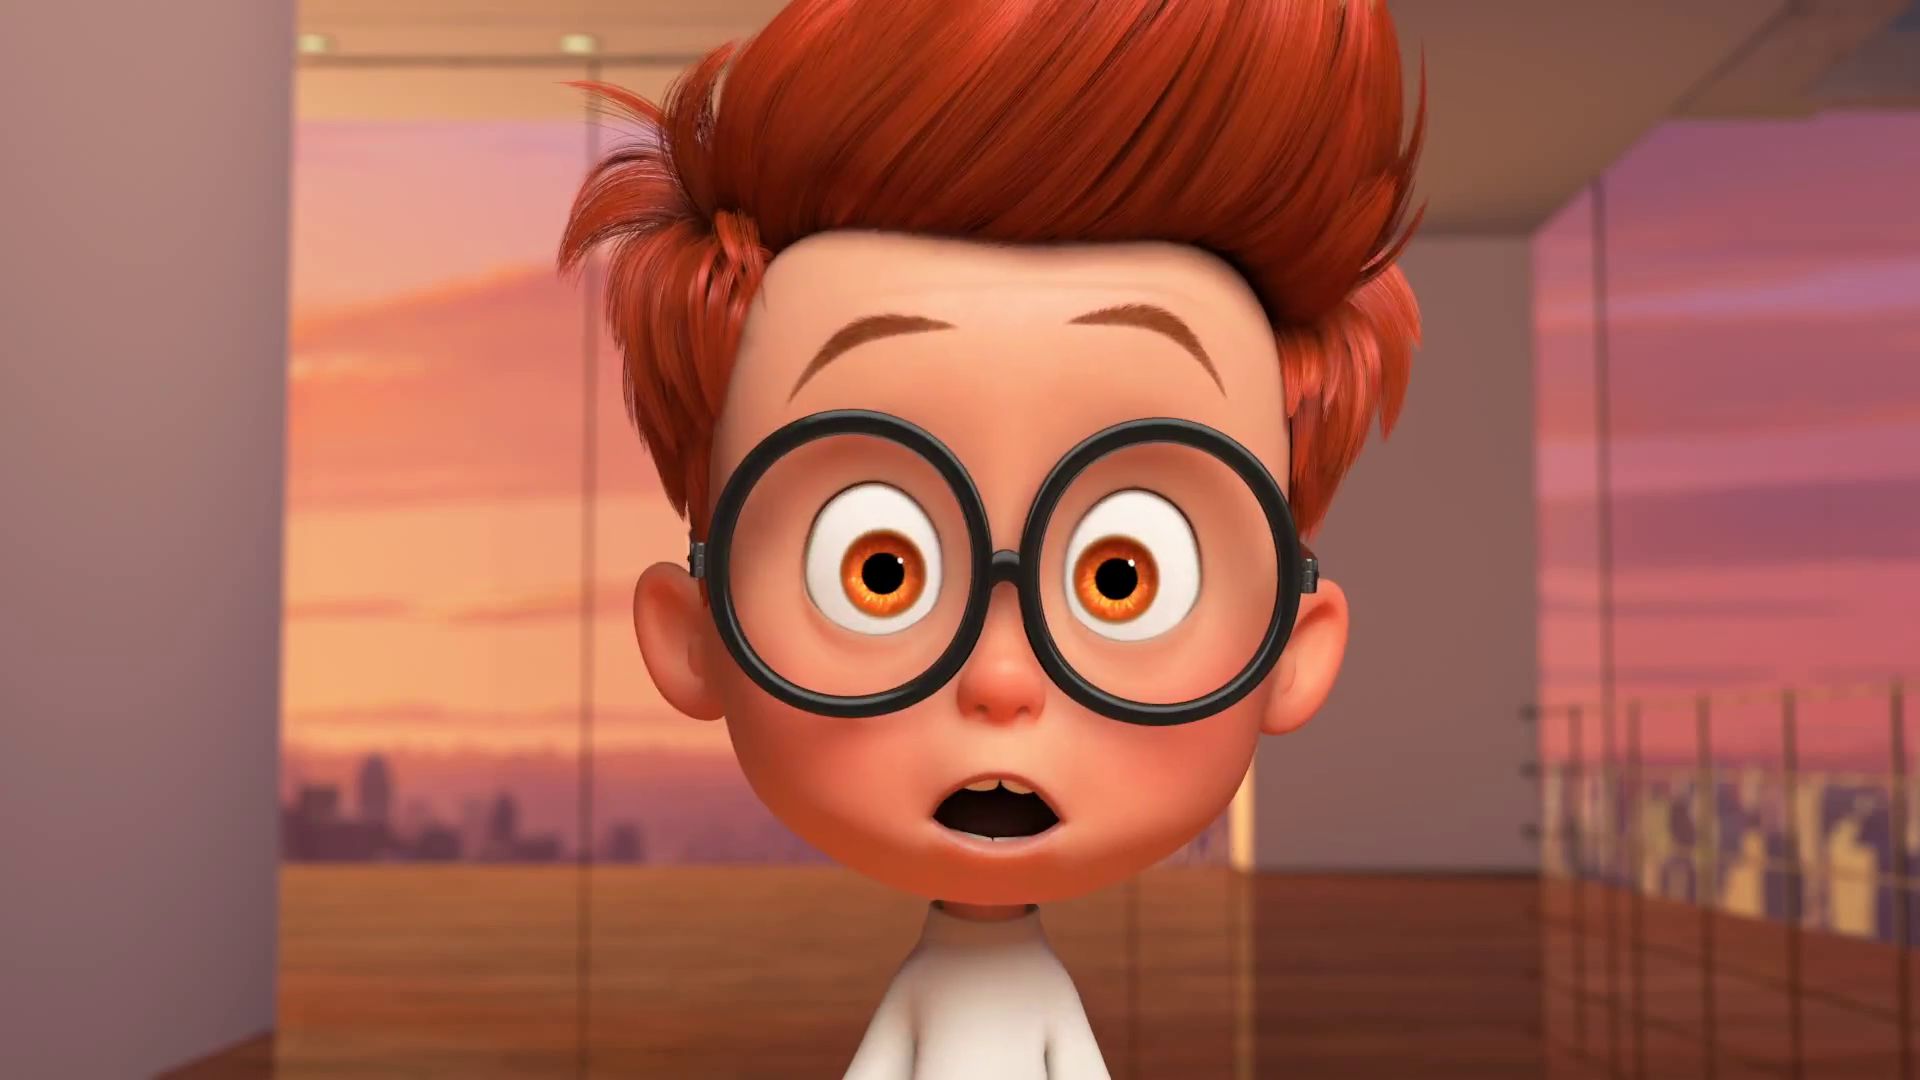 Images of Mr. Peabody & Sherman | 1920x1080